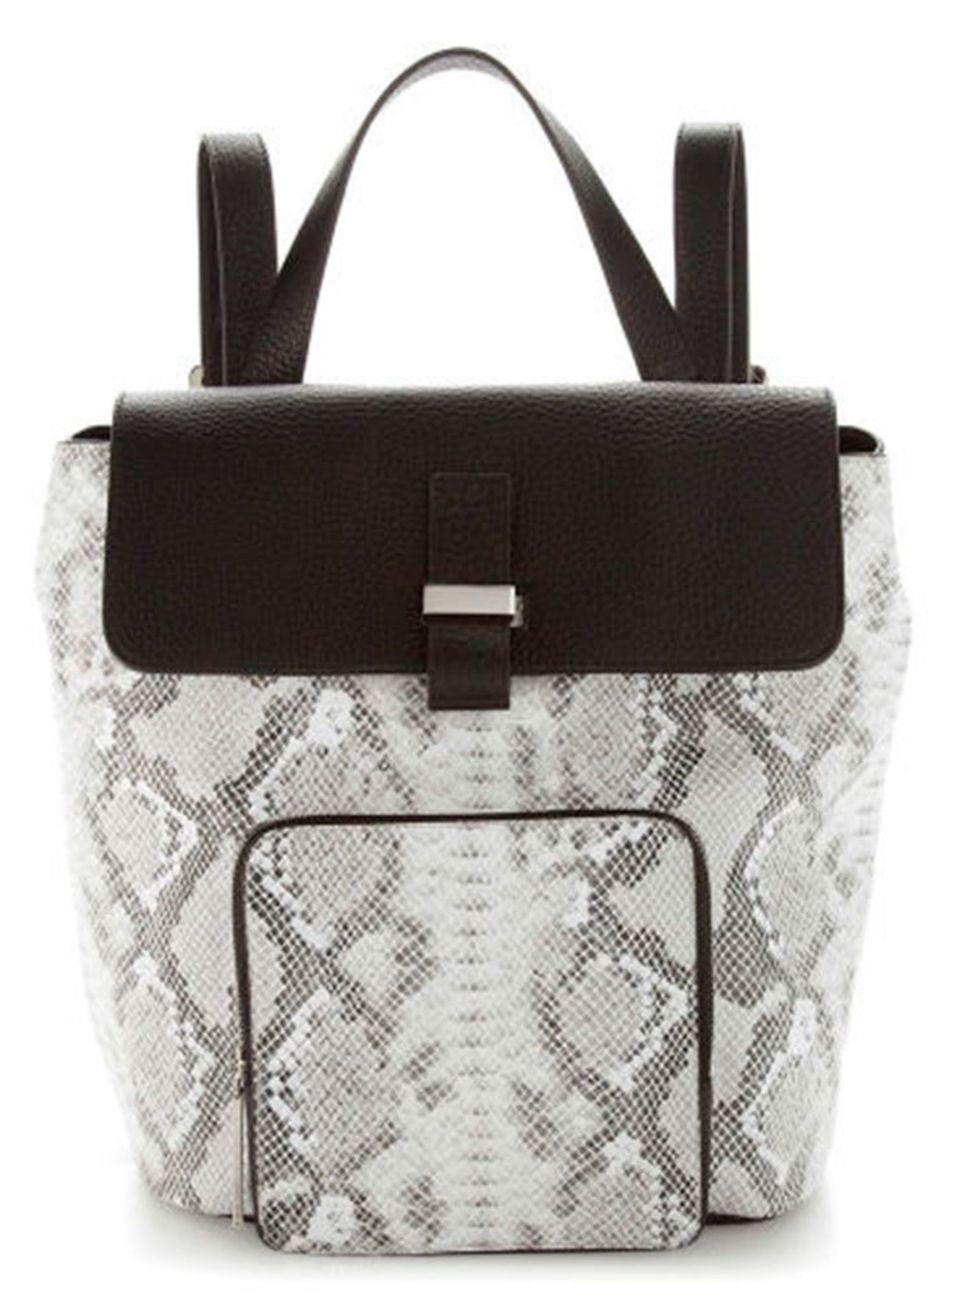 <p><a href="http://www.whistles.com/women/accessories/bags/portland-snake-backpack.html?dwvar_portland-snake-backpack_color=Black%20and%20White#start=1" target="_blank">Whistles</a> Backpack, £295</p>